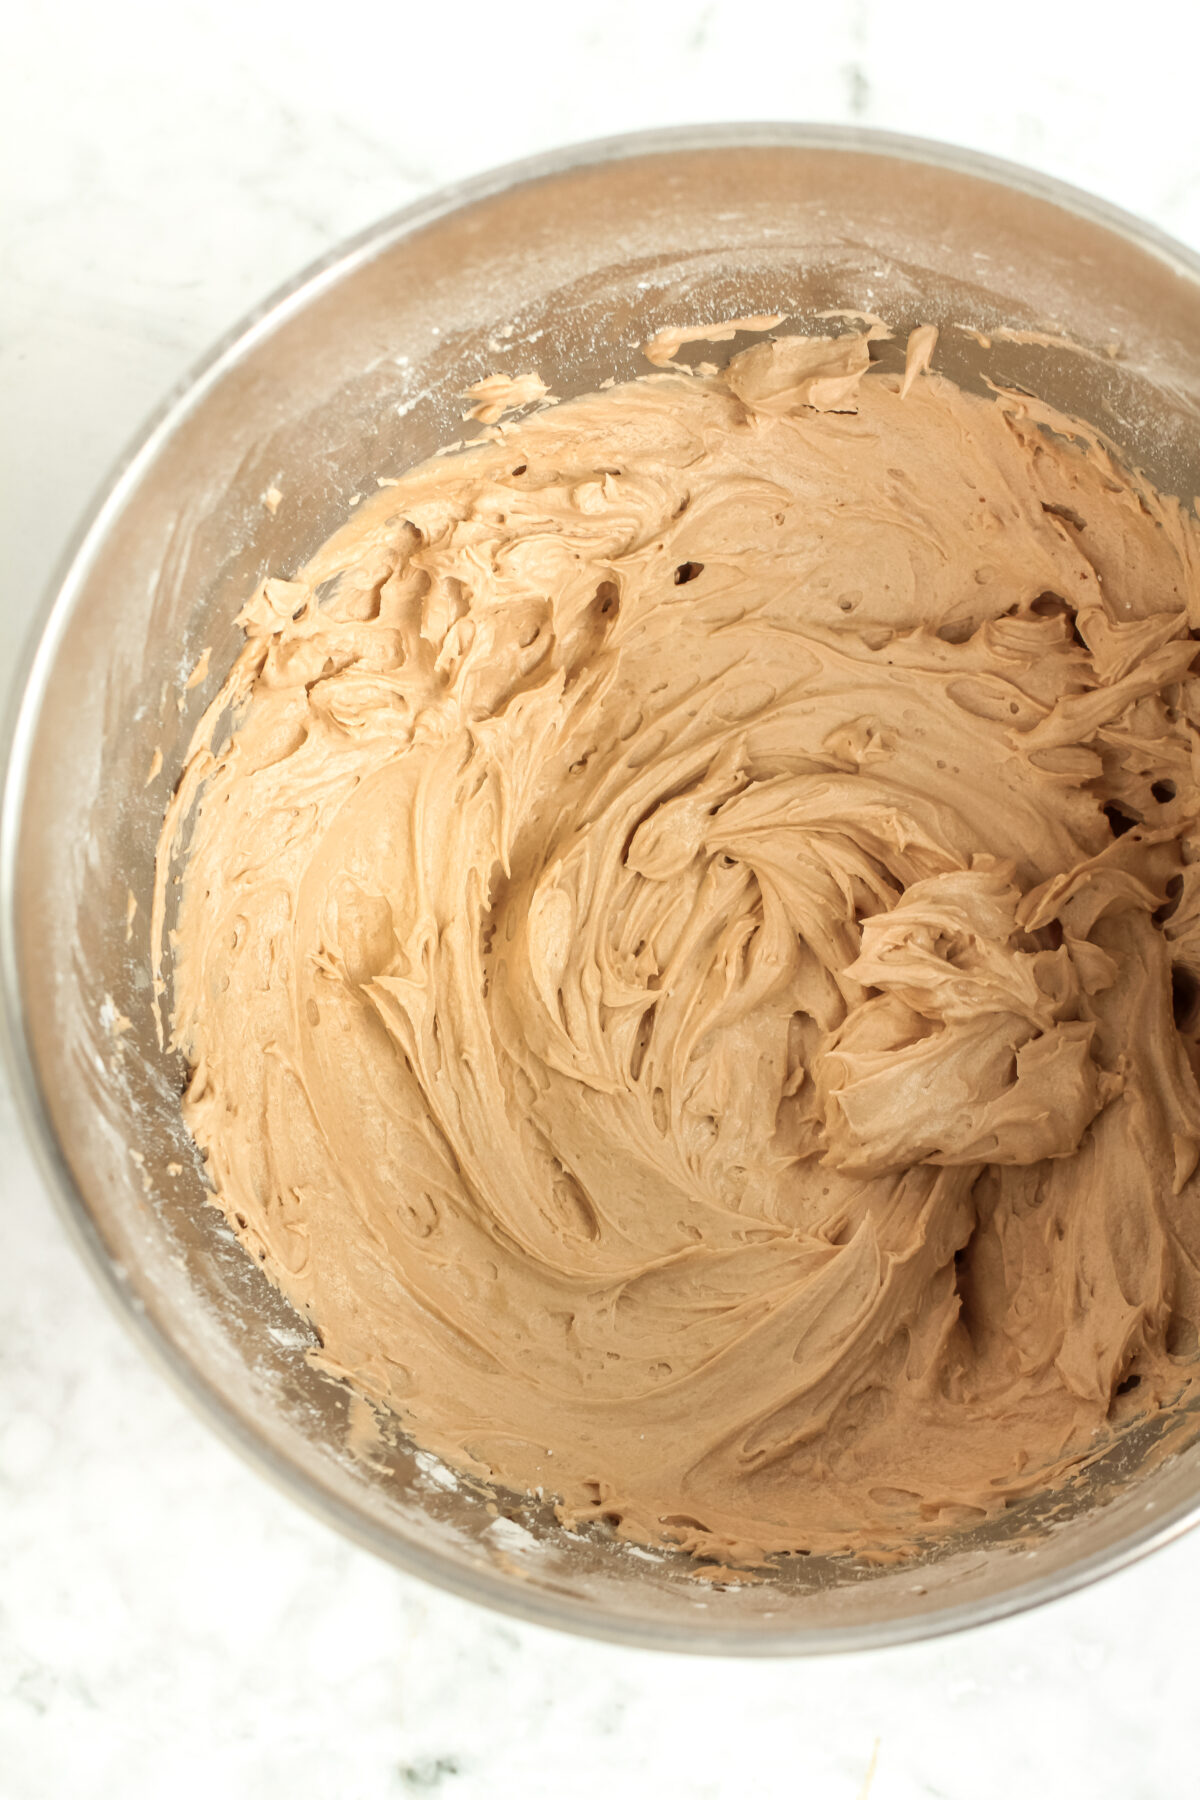 Mocha buttercream whipped together in a stand mixer bowl.